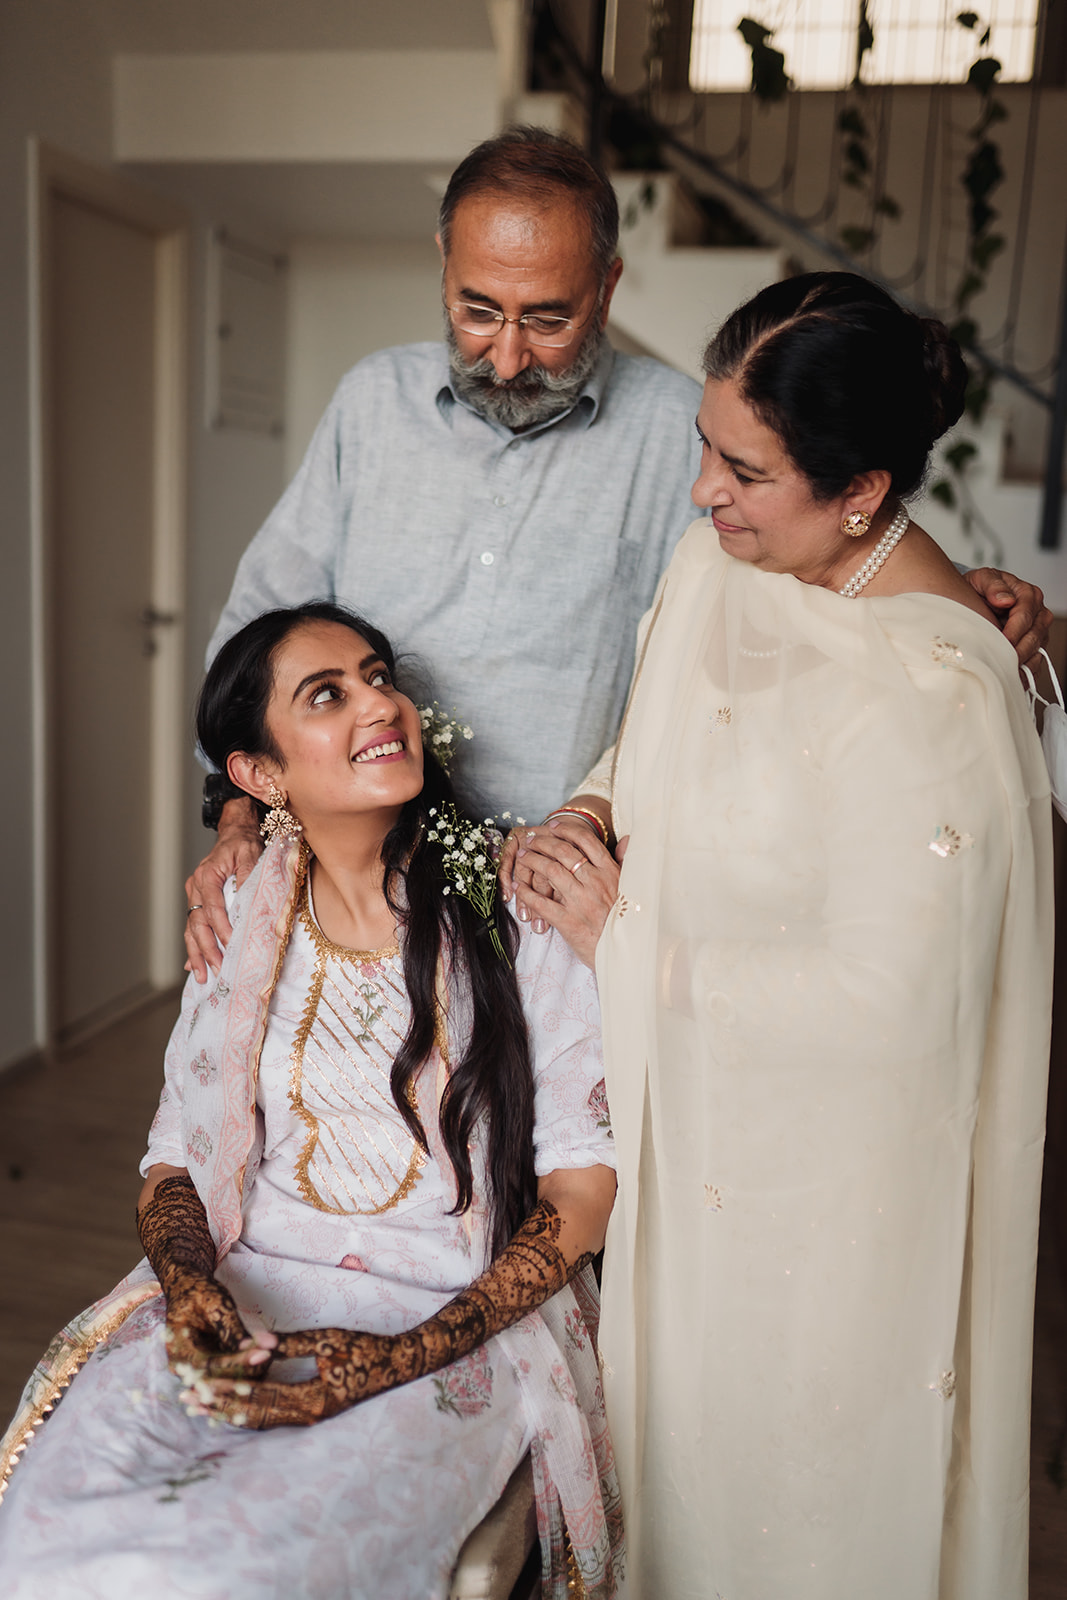 Bridal bond: A beautiful image of the bride surrounded by the love and support of her parents